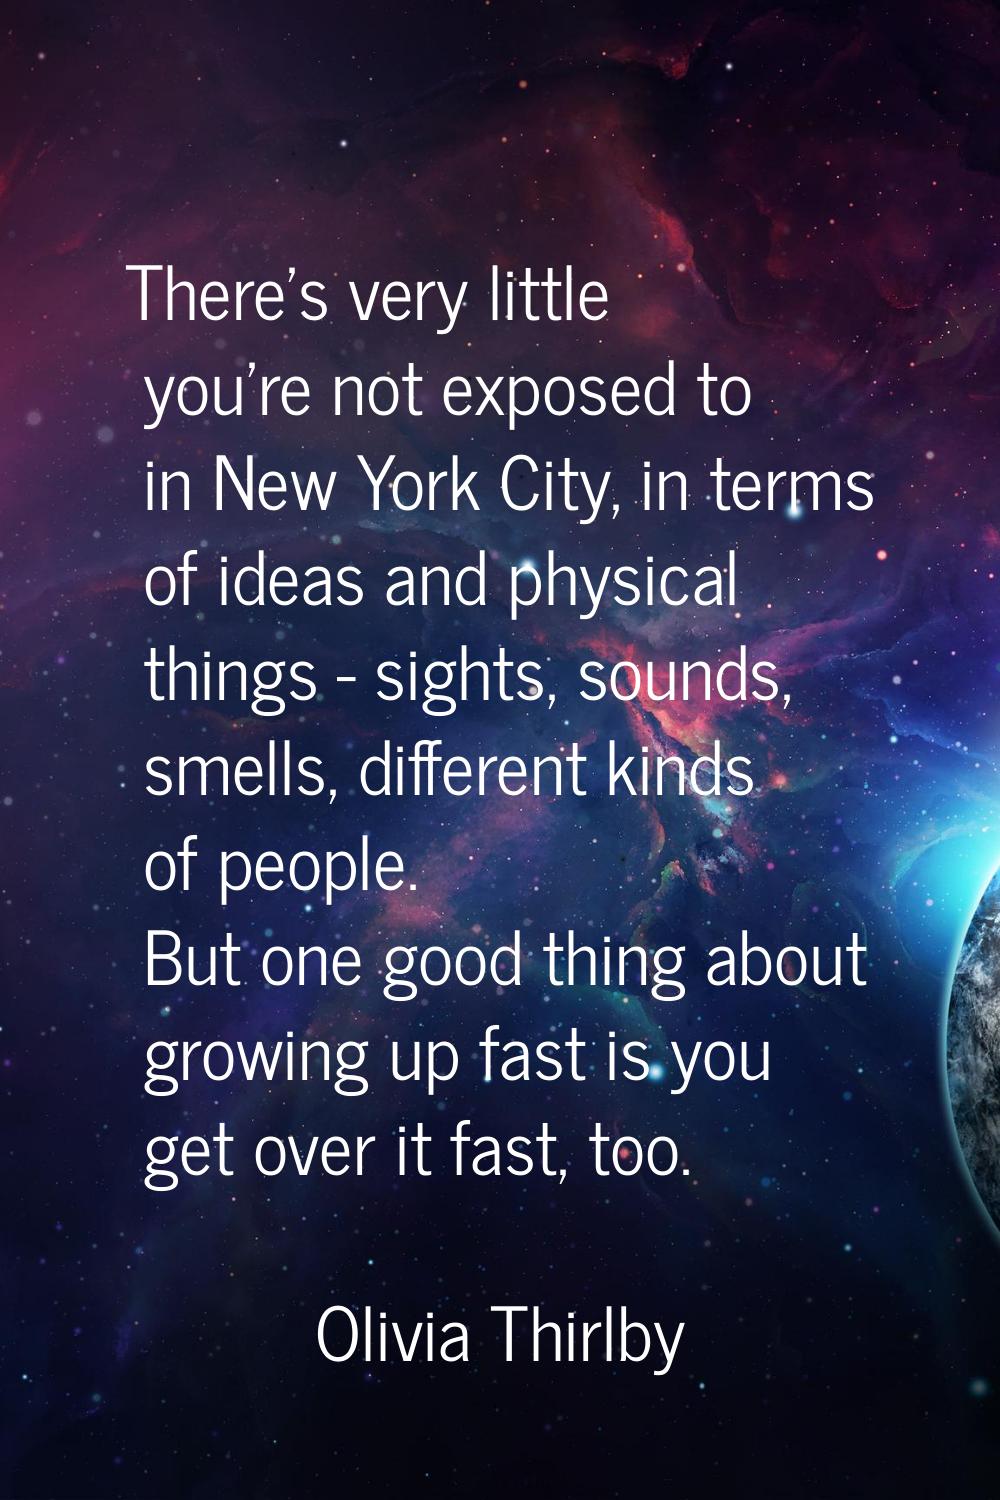 There's very little you're not exposed to in New York City, in terms of ideas and physical things -